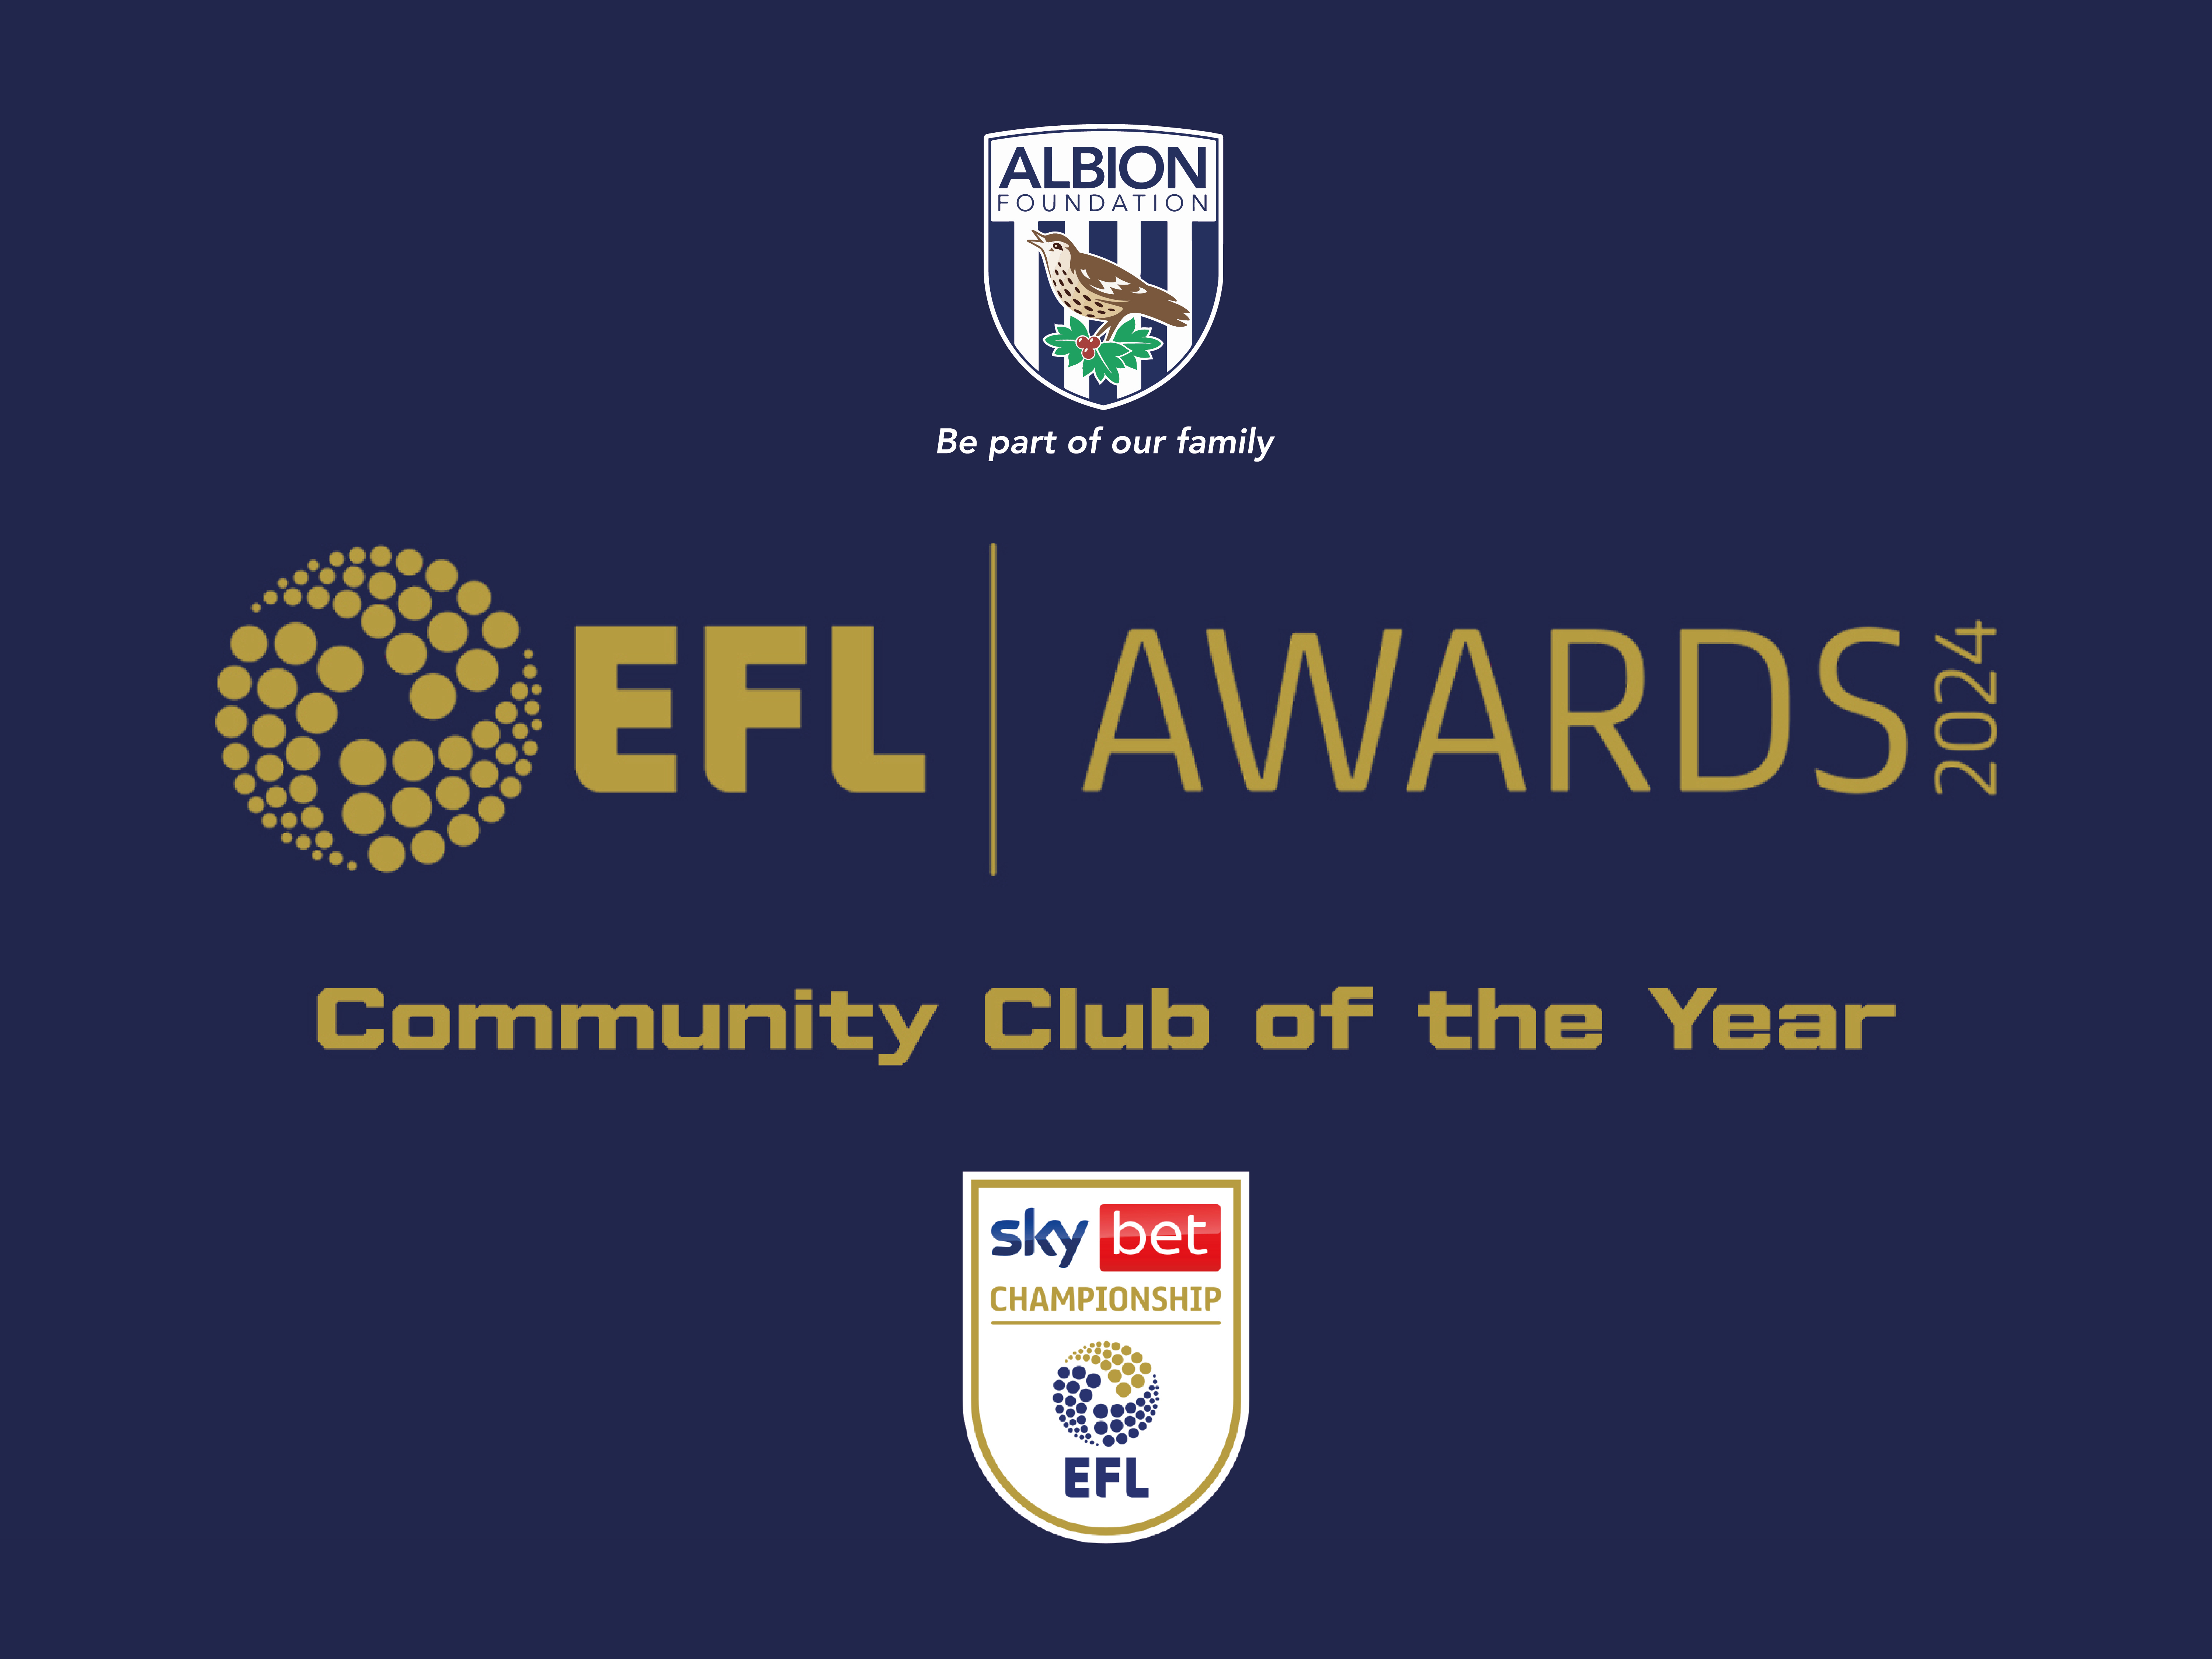 Albion Foundation Community Club of the Year award graphic 